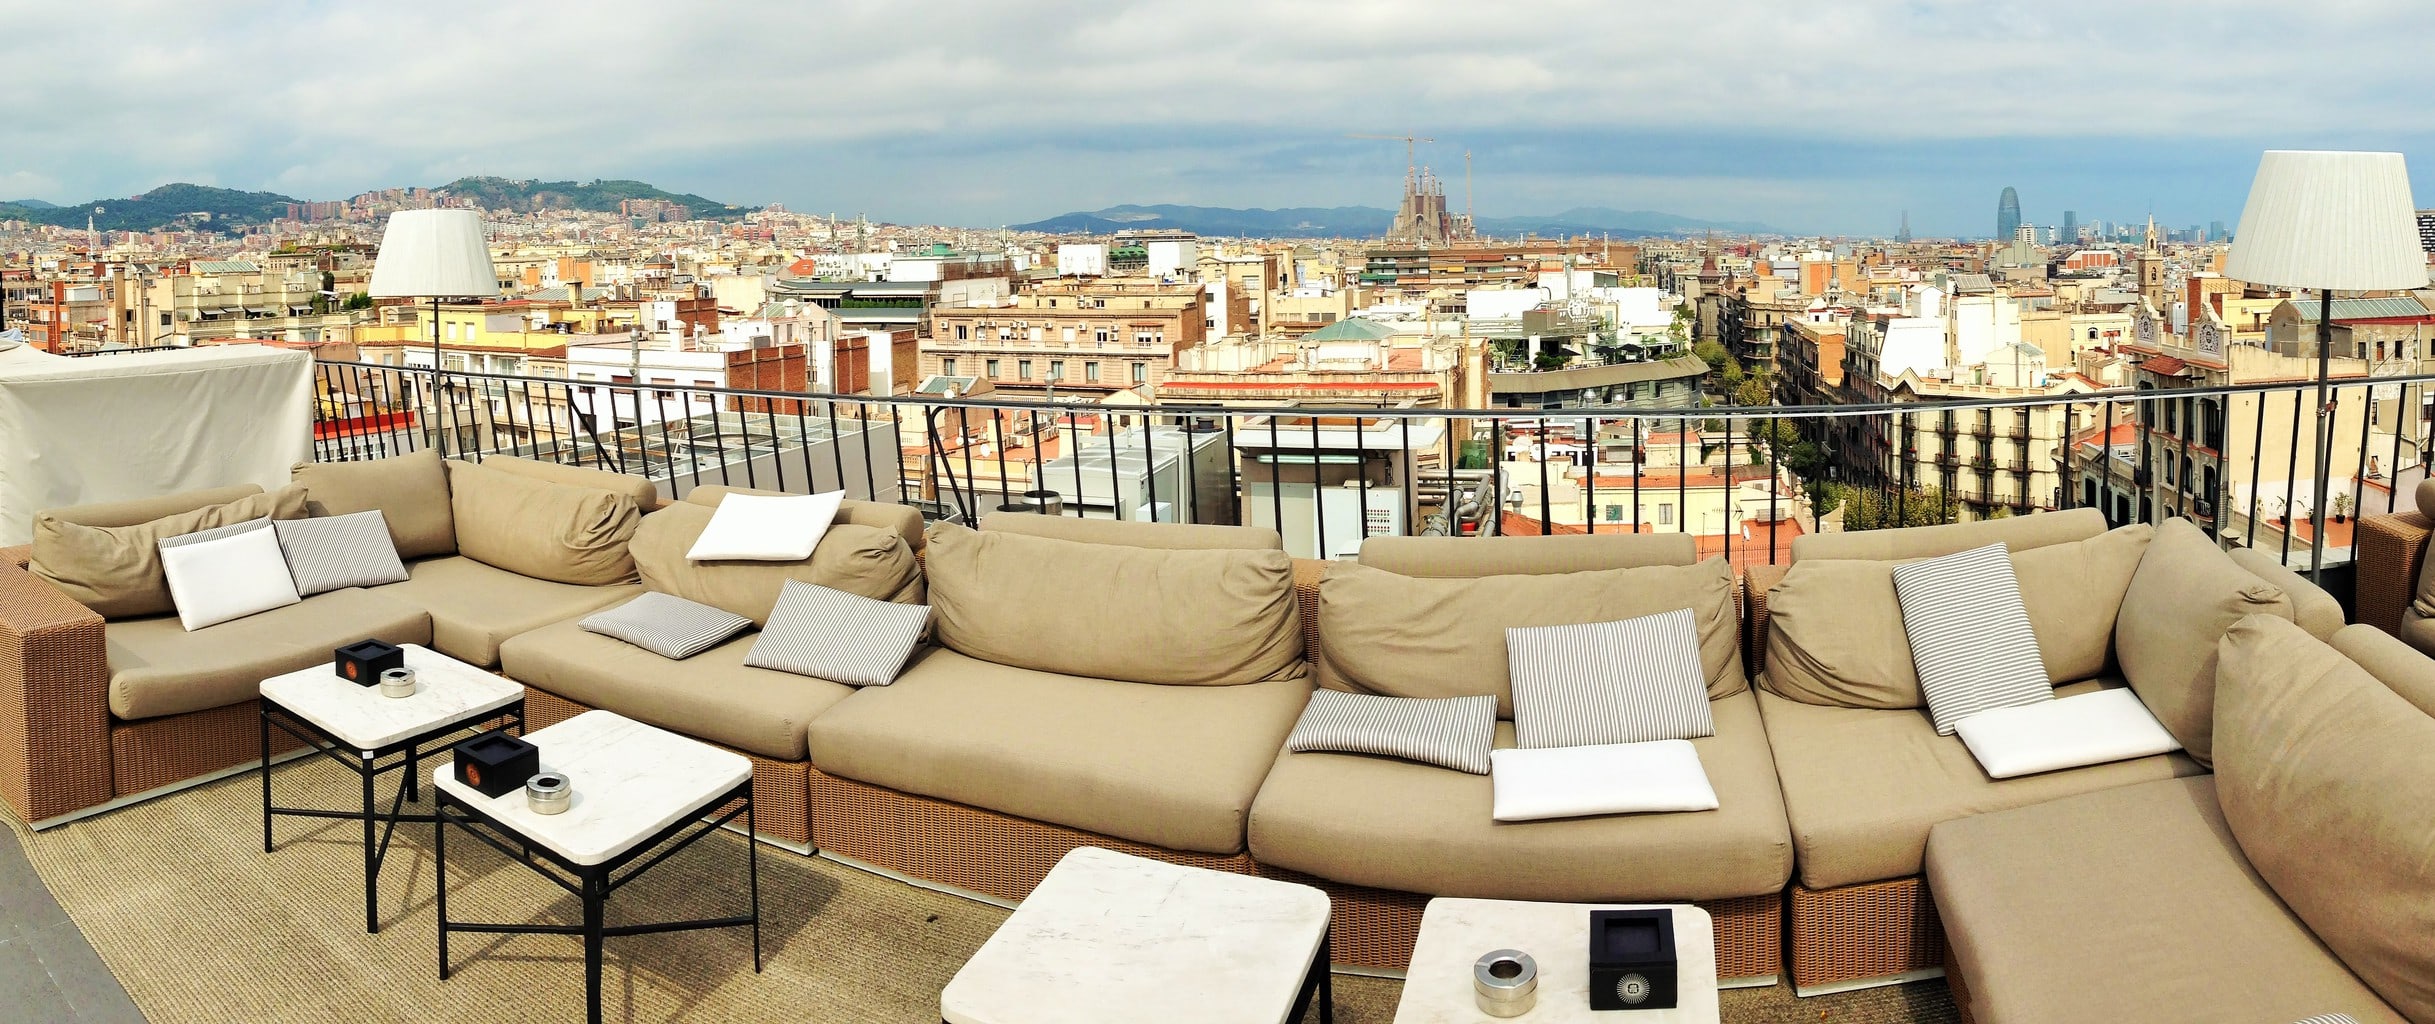 Majestic Hotel rooftop terrace views